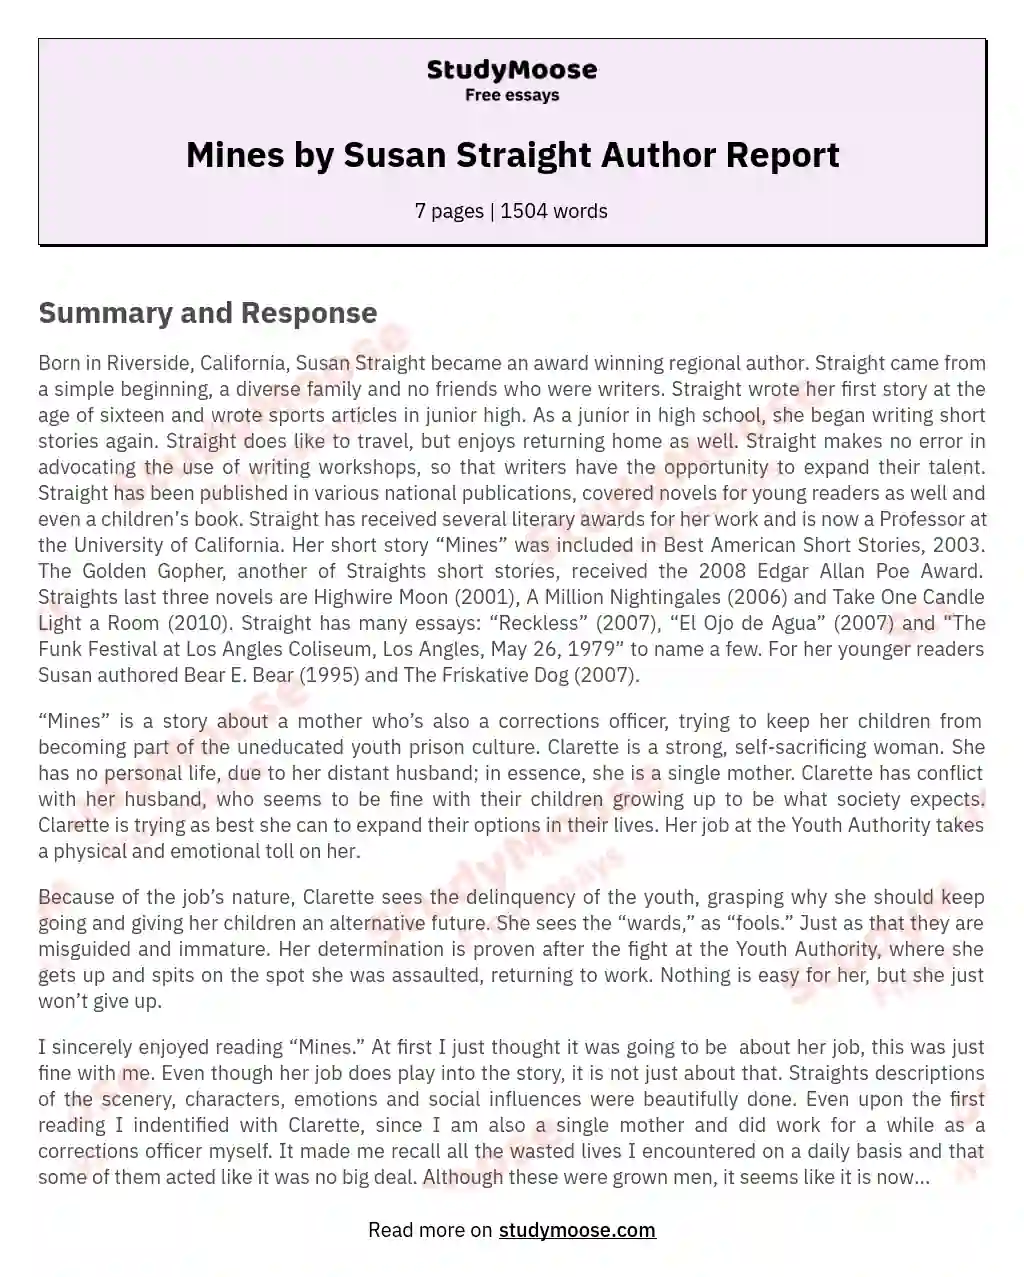 Mines by Susan Straight Author Report